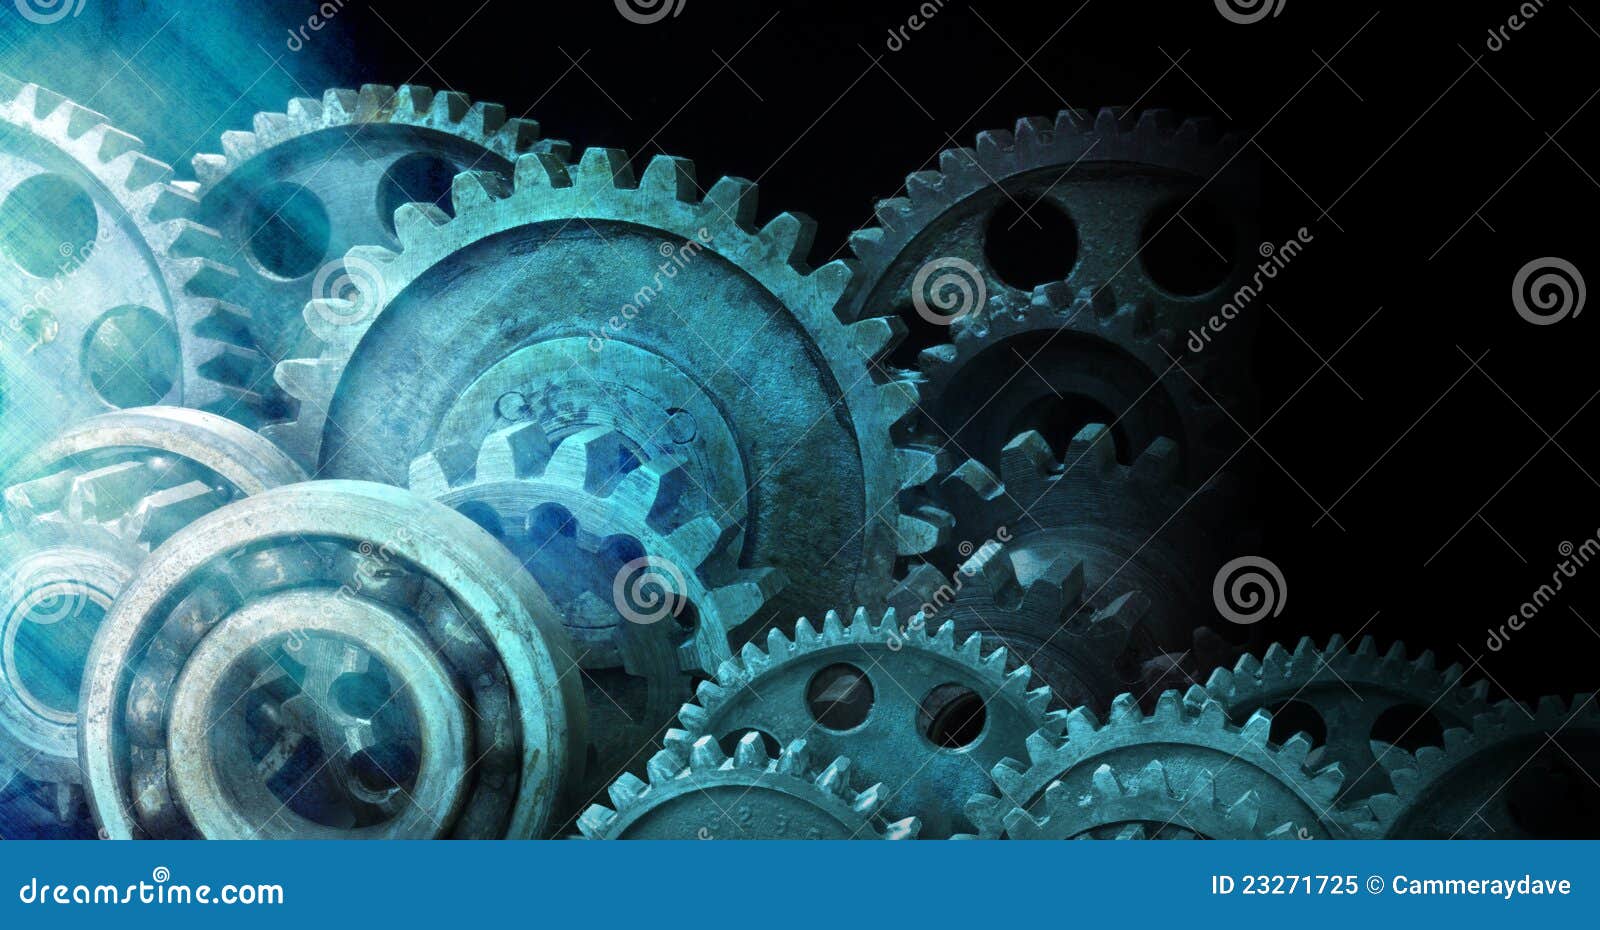 industrial cogs gears banner background